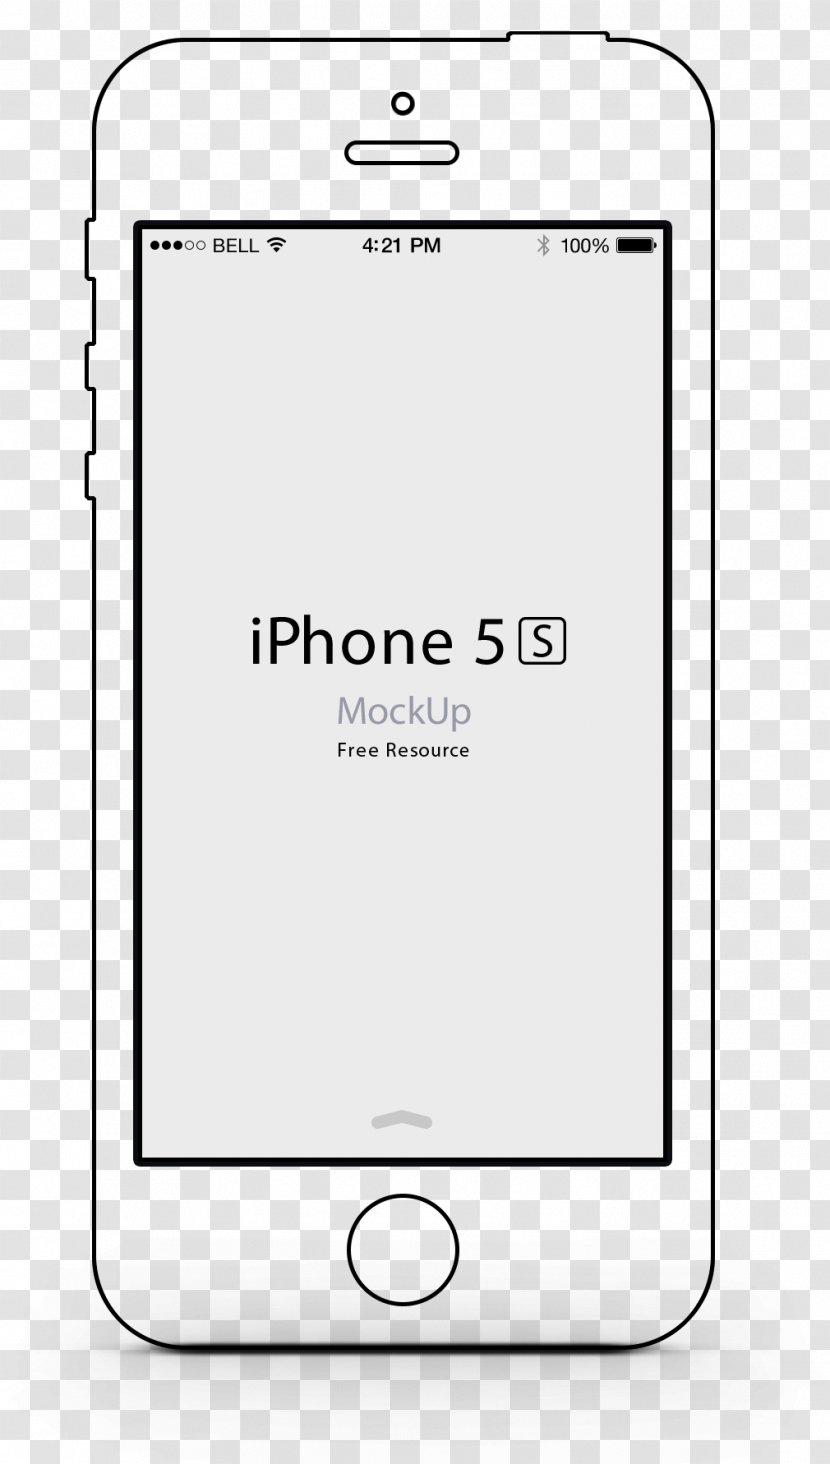 IPhone 5s 6 Smartphone Feature Phone - Iphone 5 - IPhone5S Transparent PNG